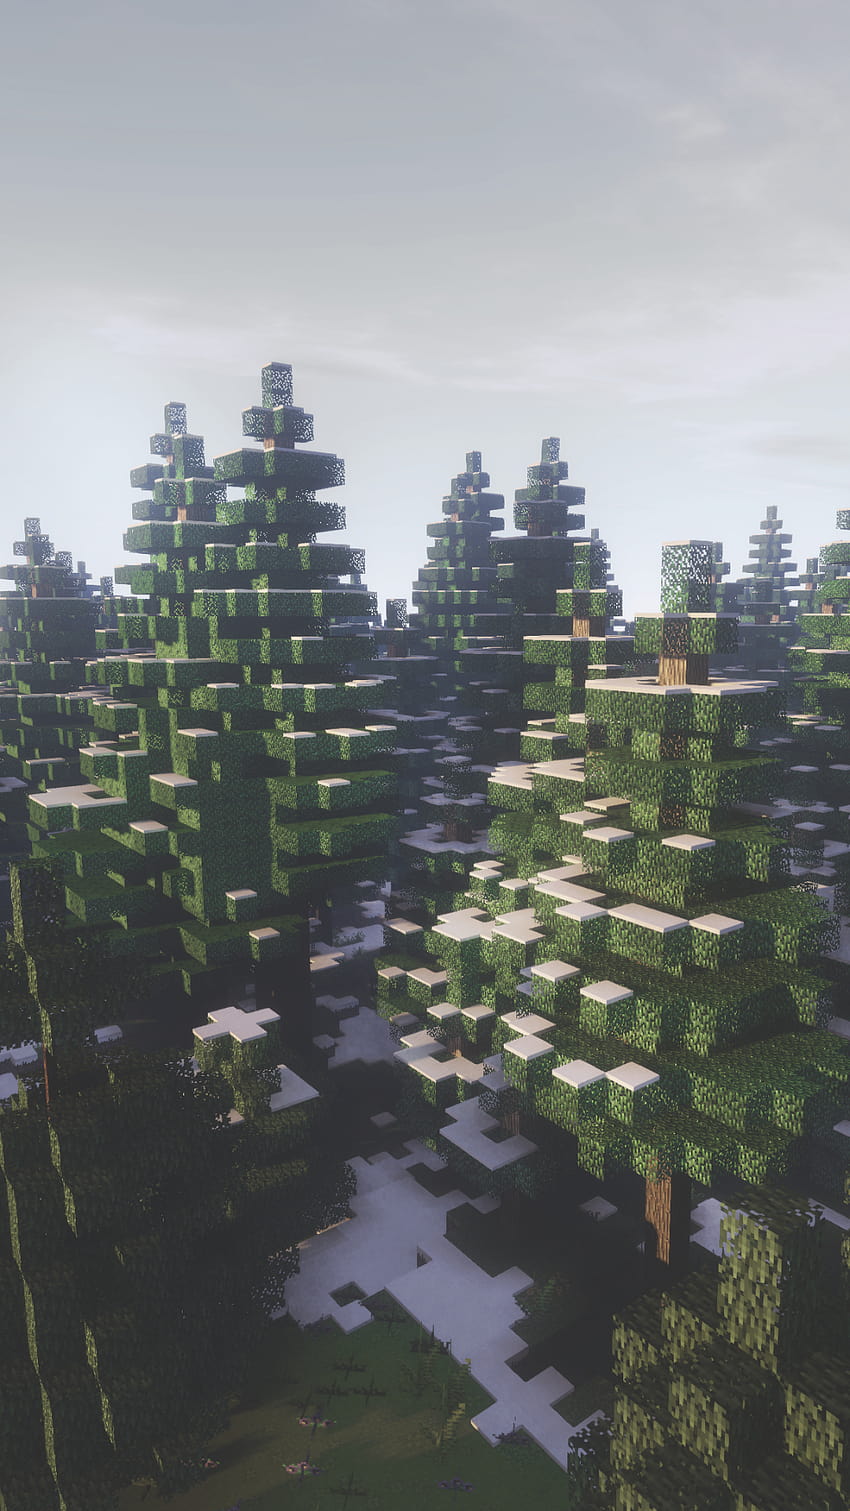 I made a 2D jungle render! : wallpapers  Minecraft wallpaper, Jungle  wallpaper, Heaven wallpaper